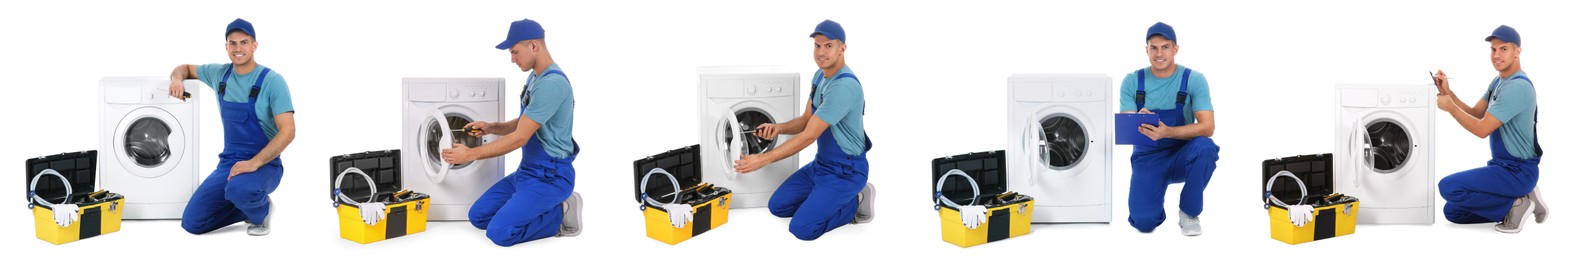 Collage with photos of plumber repairing washing machine on white background. Banner design